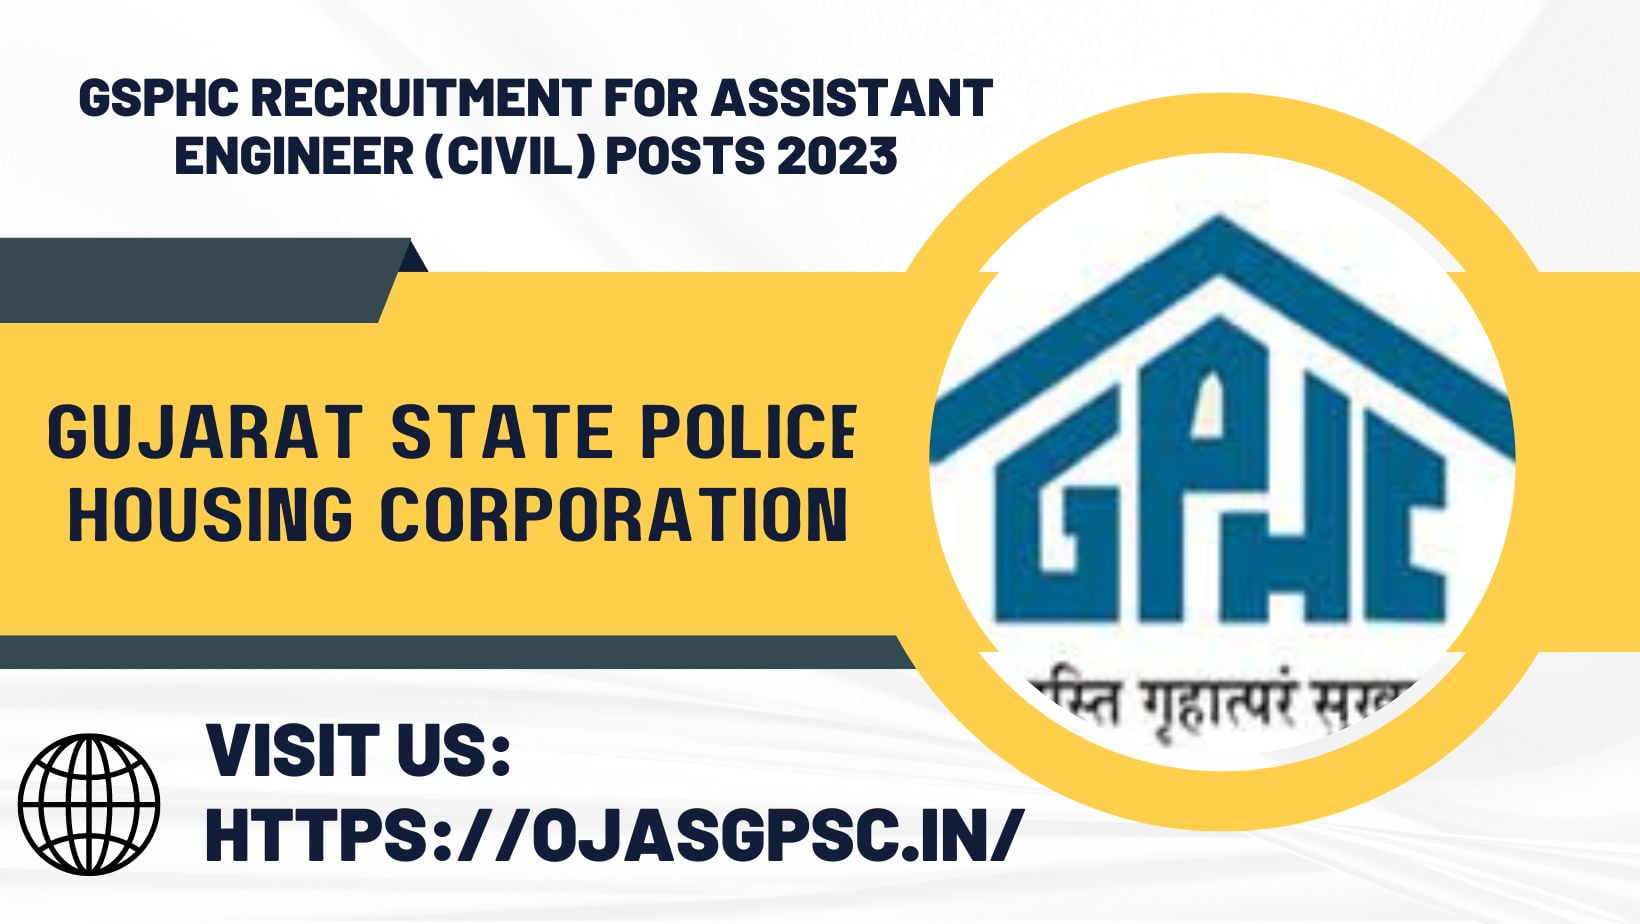 Gujarat State Police Housing Corporation (GSPHC) Recruitment for Assistant Engineer (Civil) Posts 2023 (OJAS)